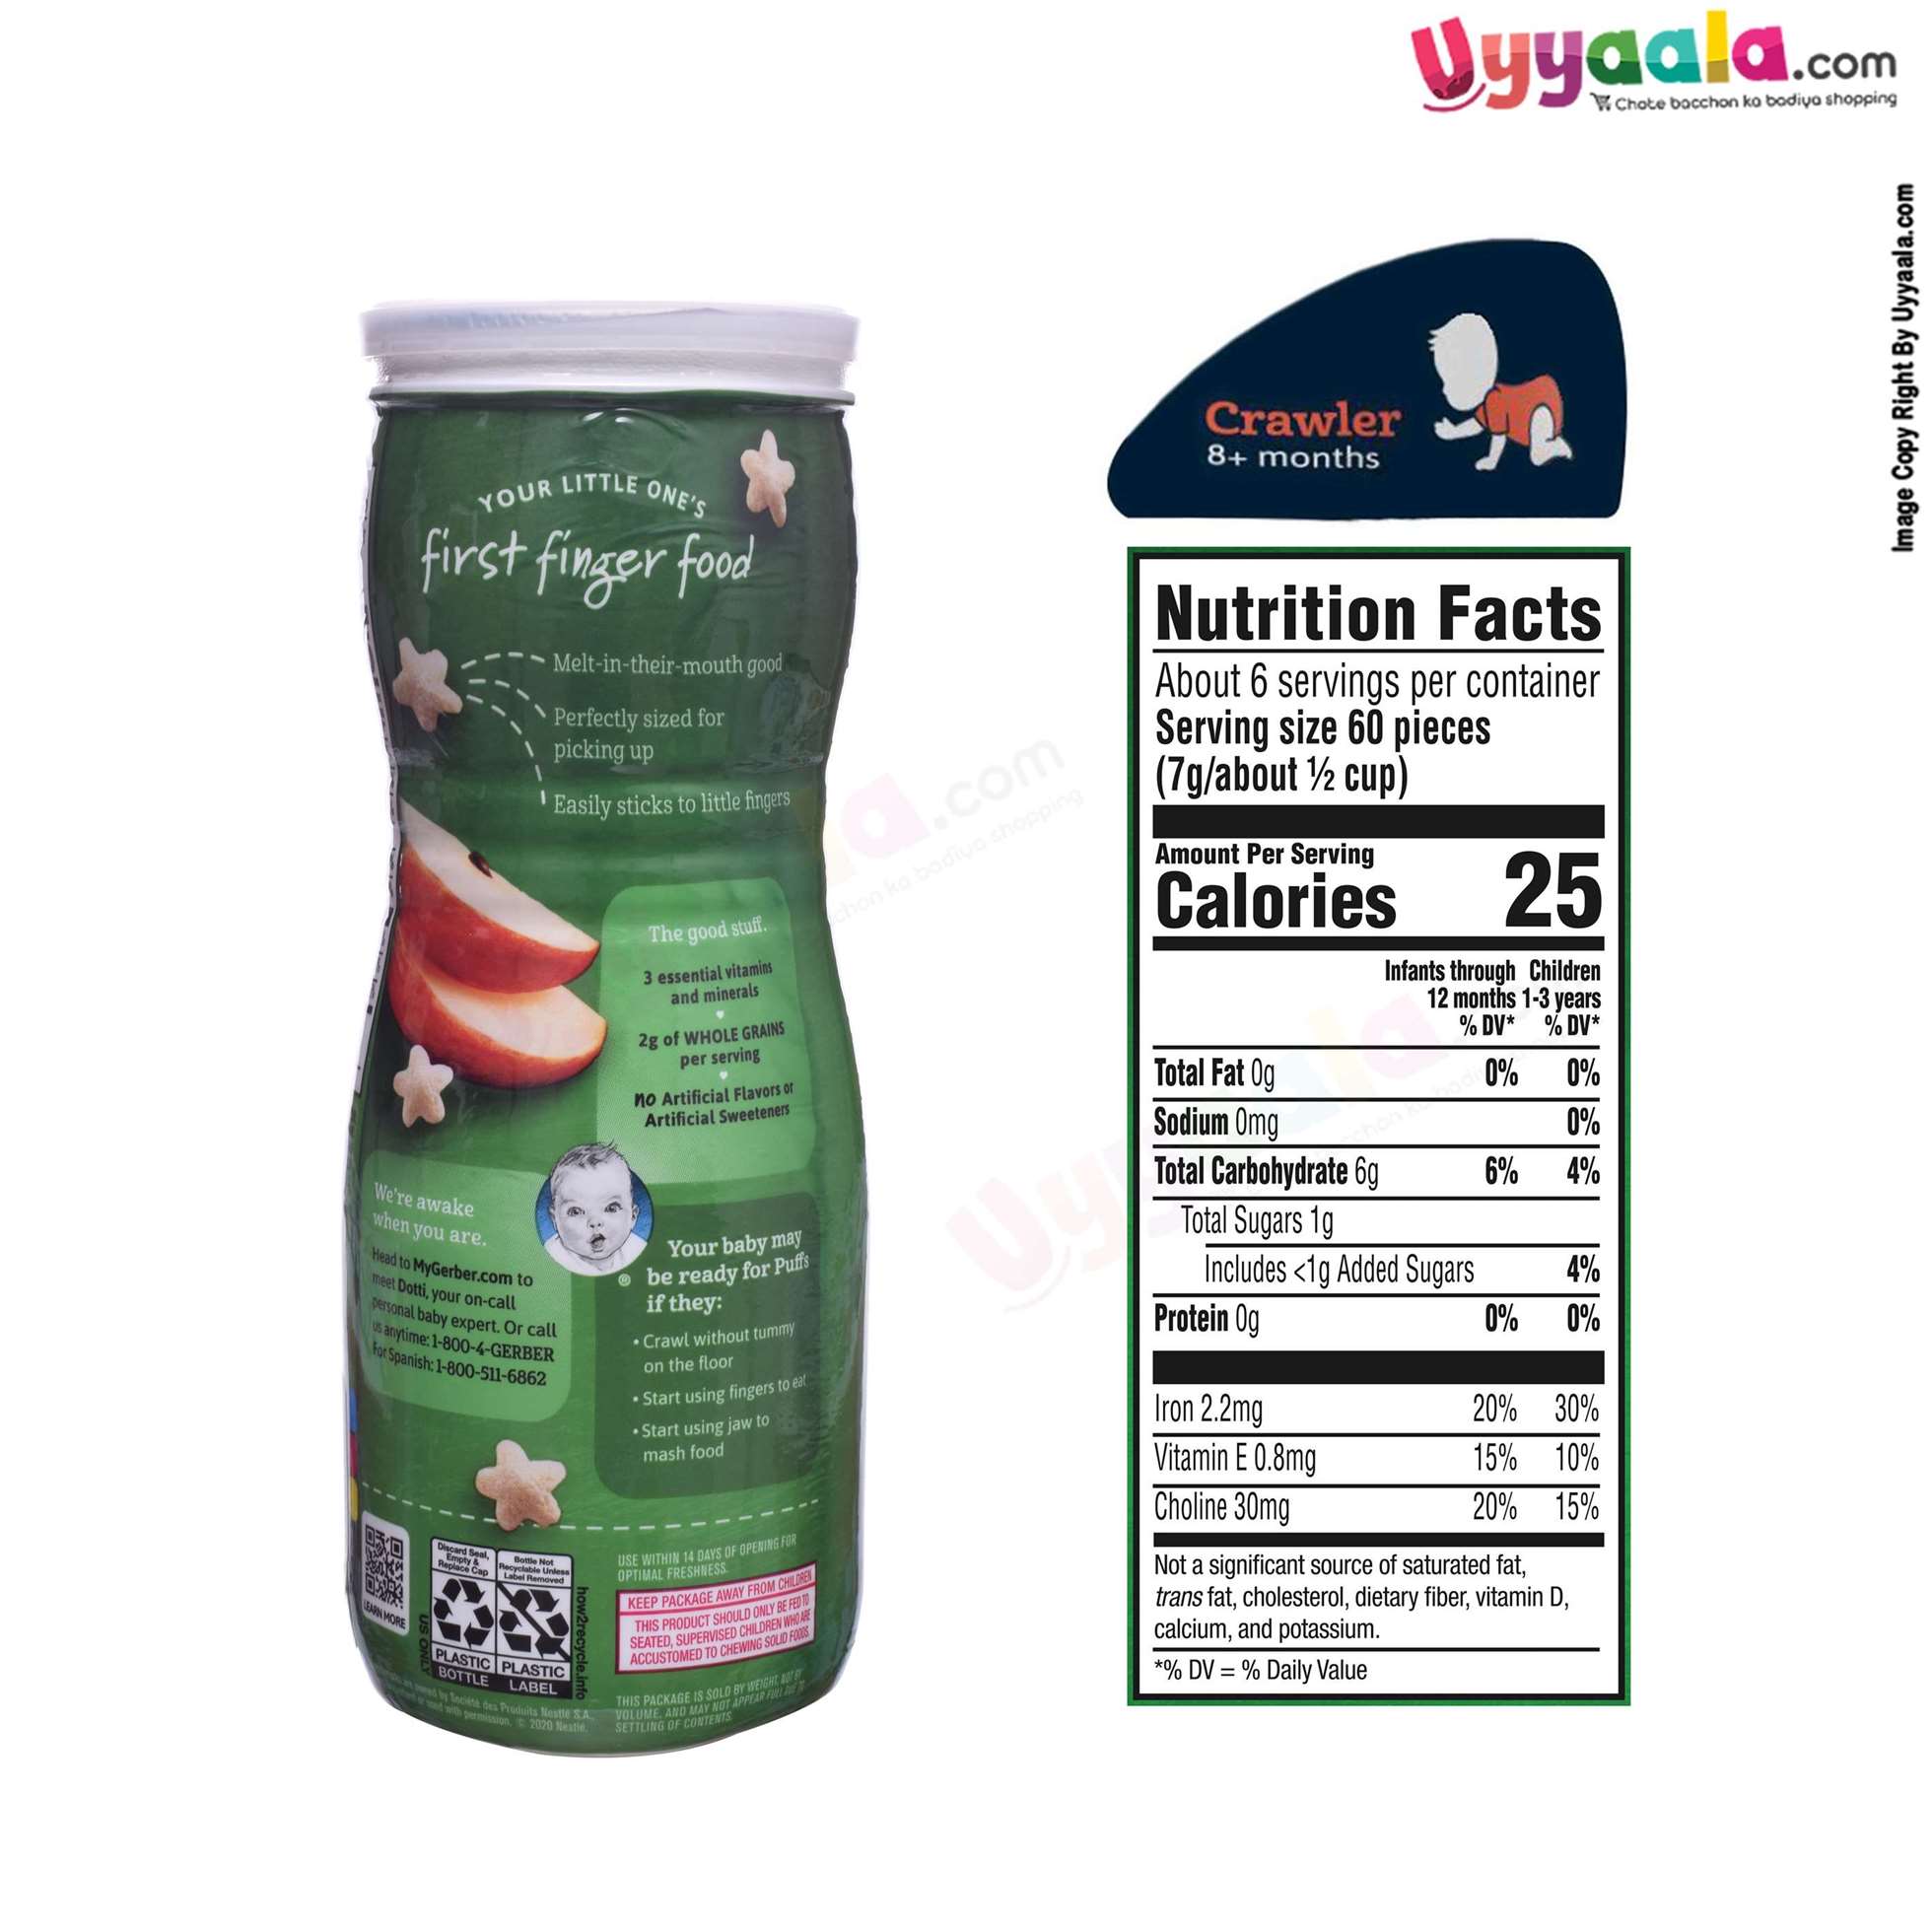 GERBER Puffs - blueberry & organic apple, naturally flavored baby snack, combo of 2 (42g each) - 8 months +